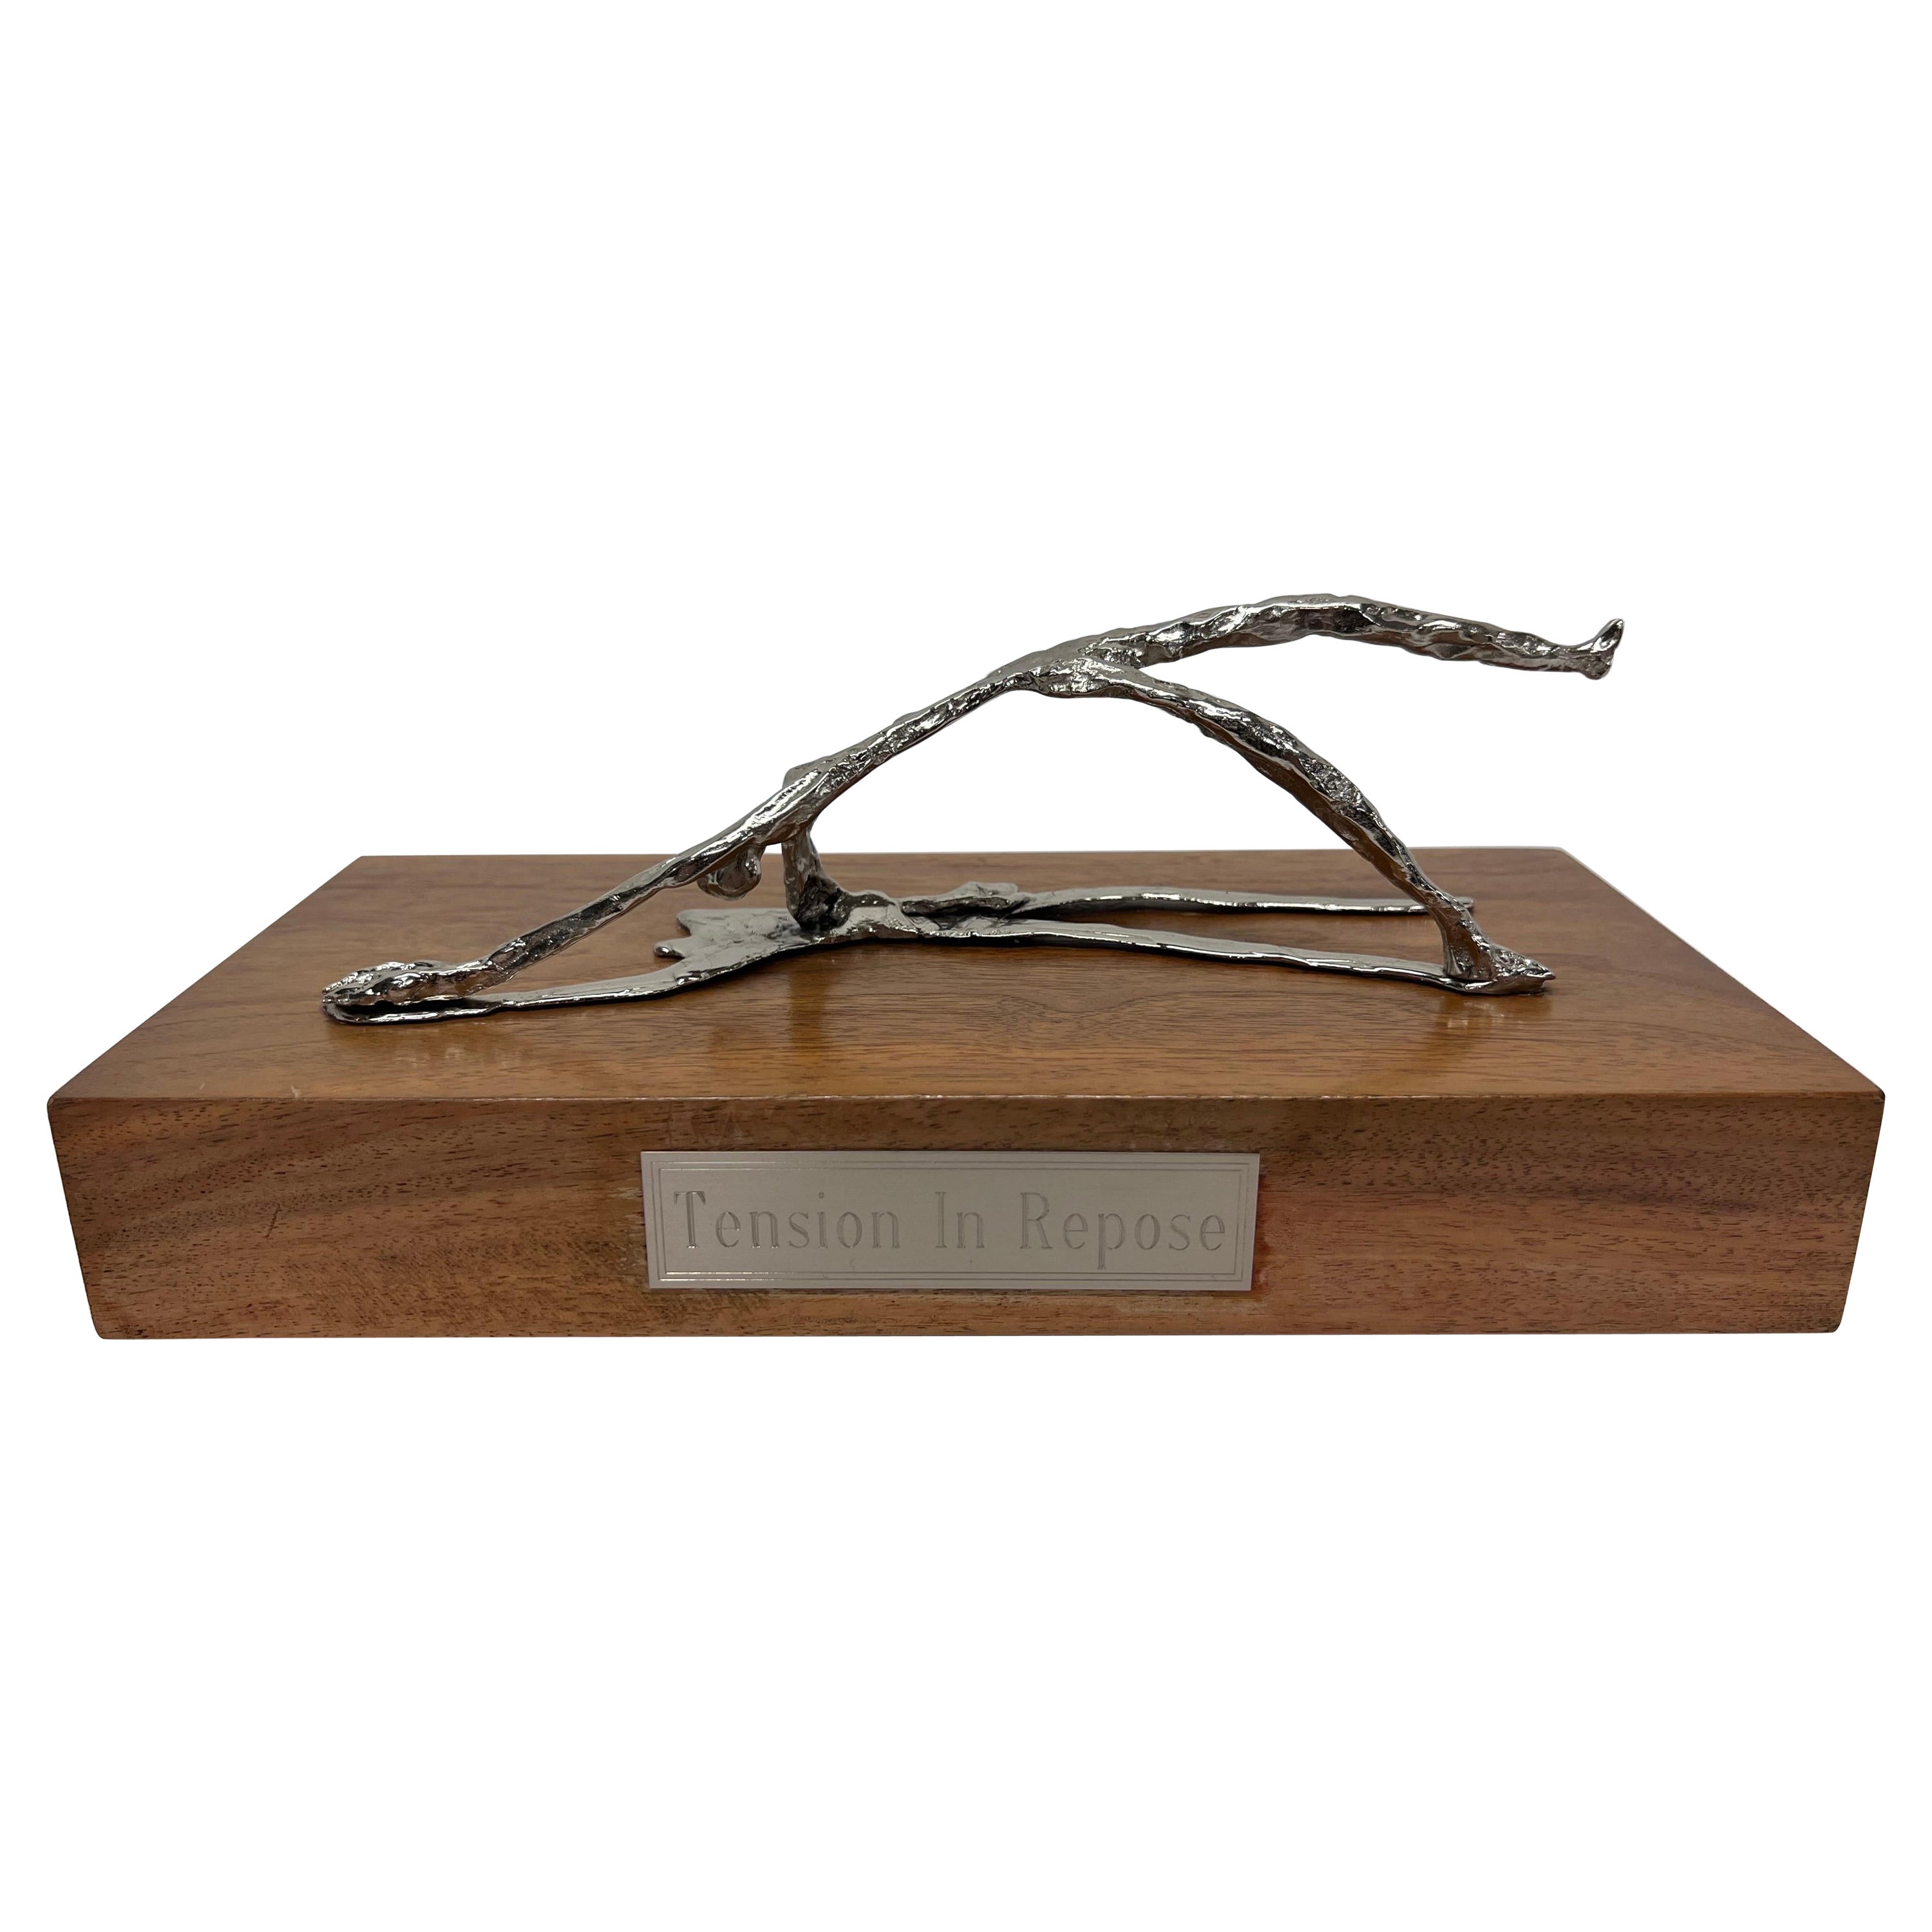 Contemporary Metal Sculpture Titled "Tension in Repose" For Sale